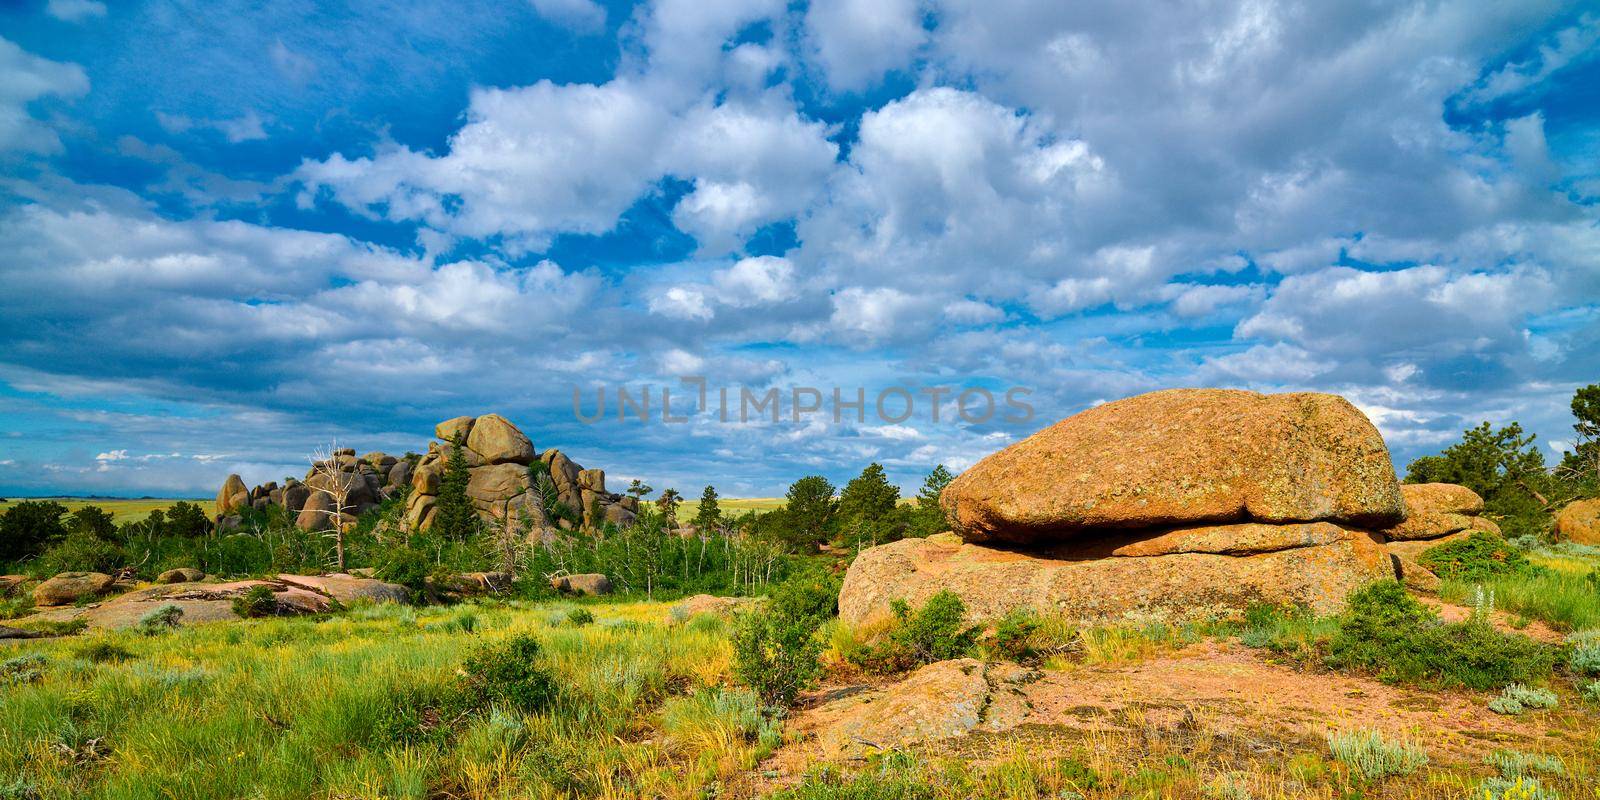 Rock formations at Vedauwoo Recreation Area, WY.